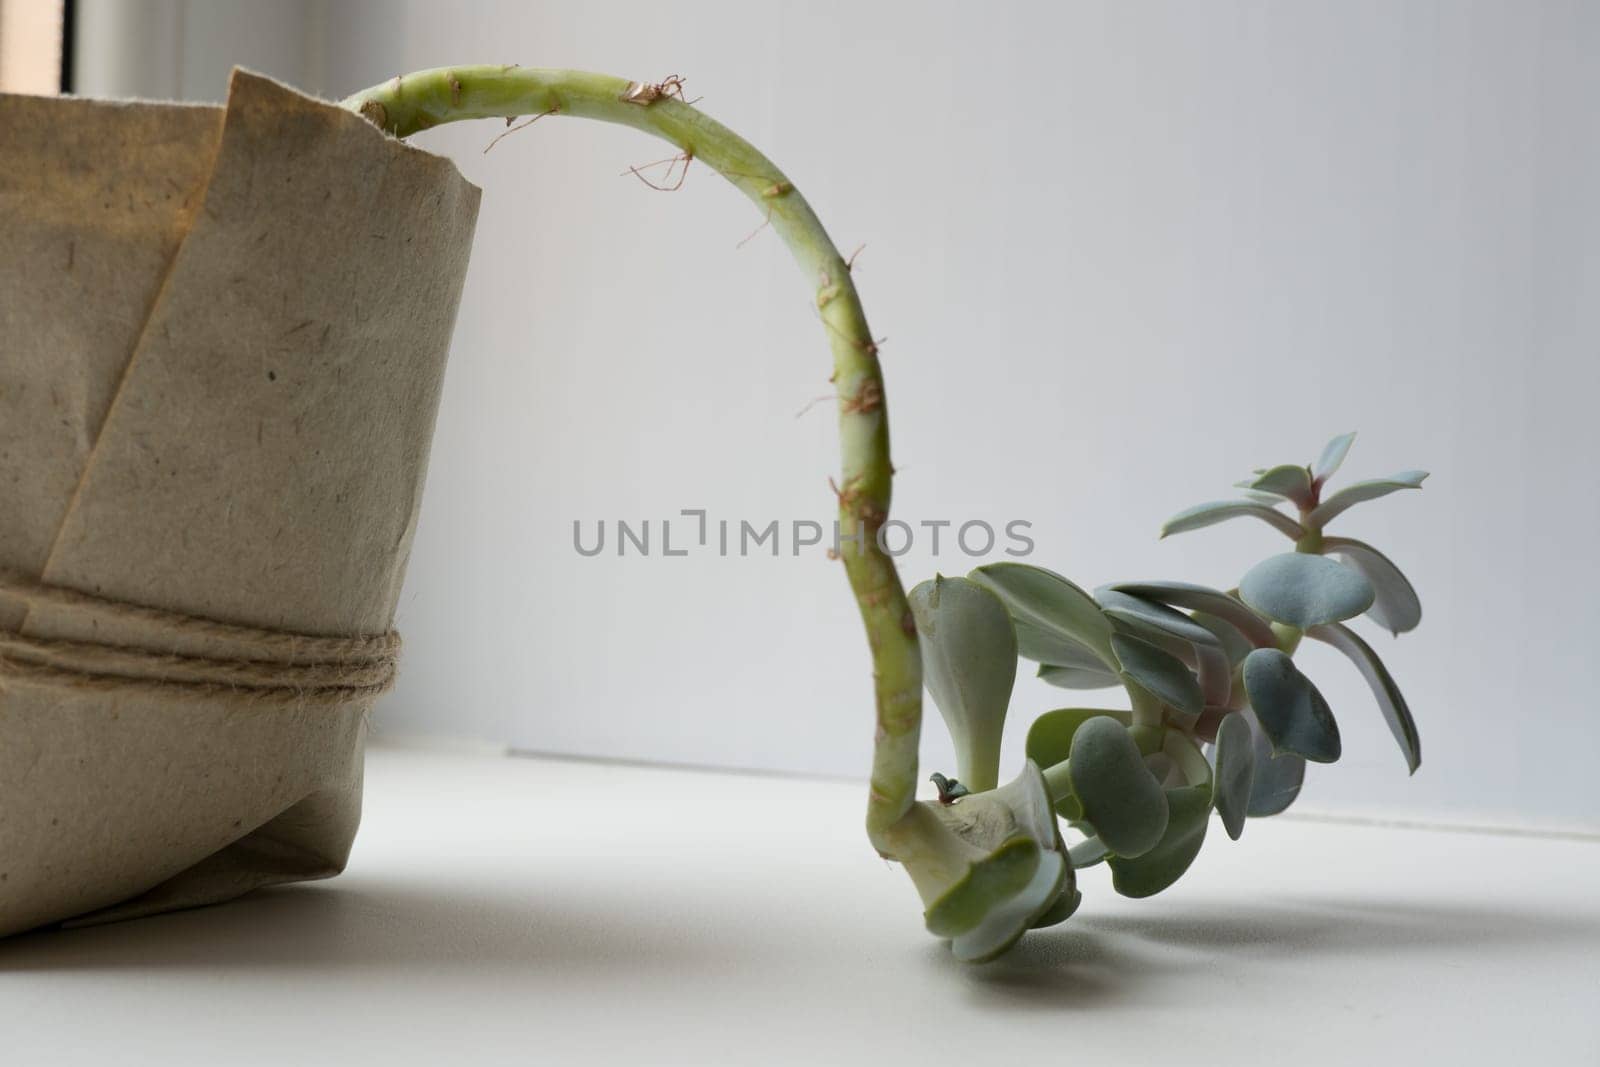 The echeveria succulent has stretched out due to lack of light. etiolation of succulents by Ekaterina34